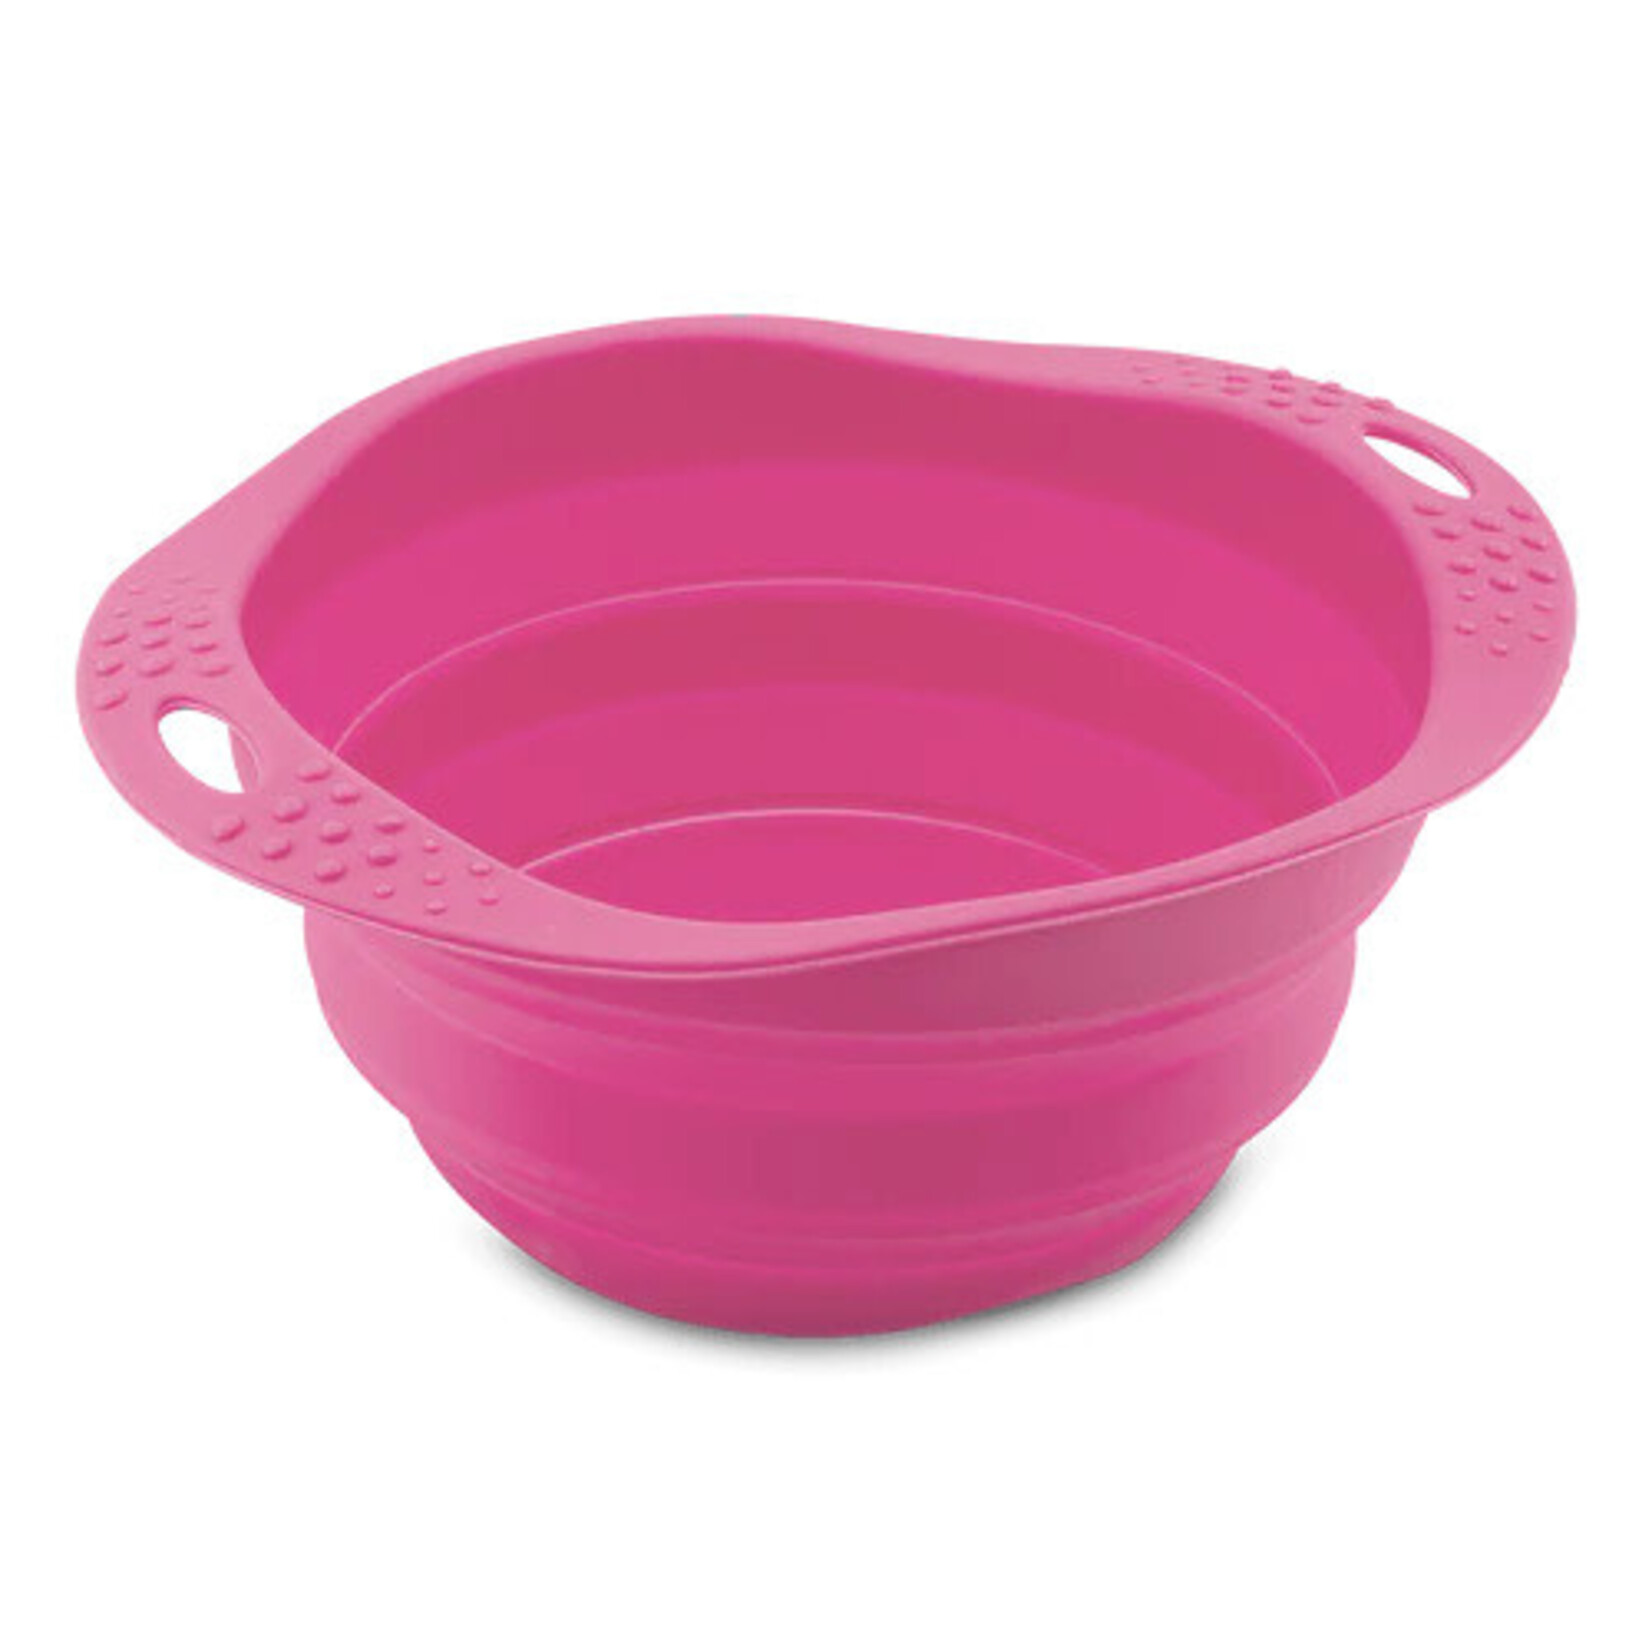 Beco Pets The Adventure Travel Bowl- Beco